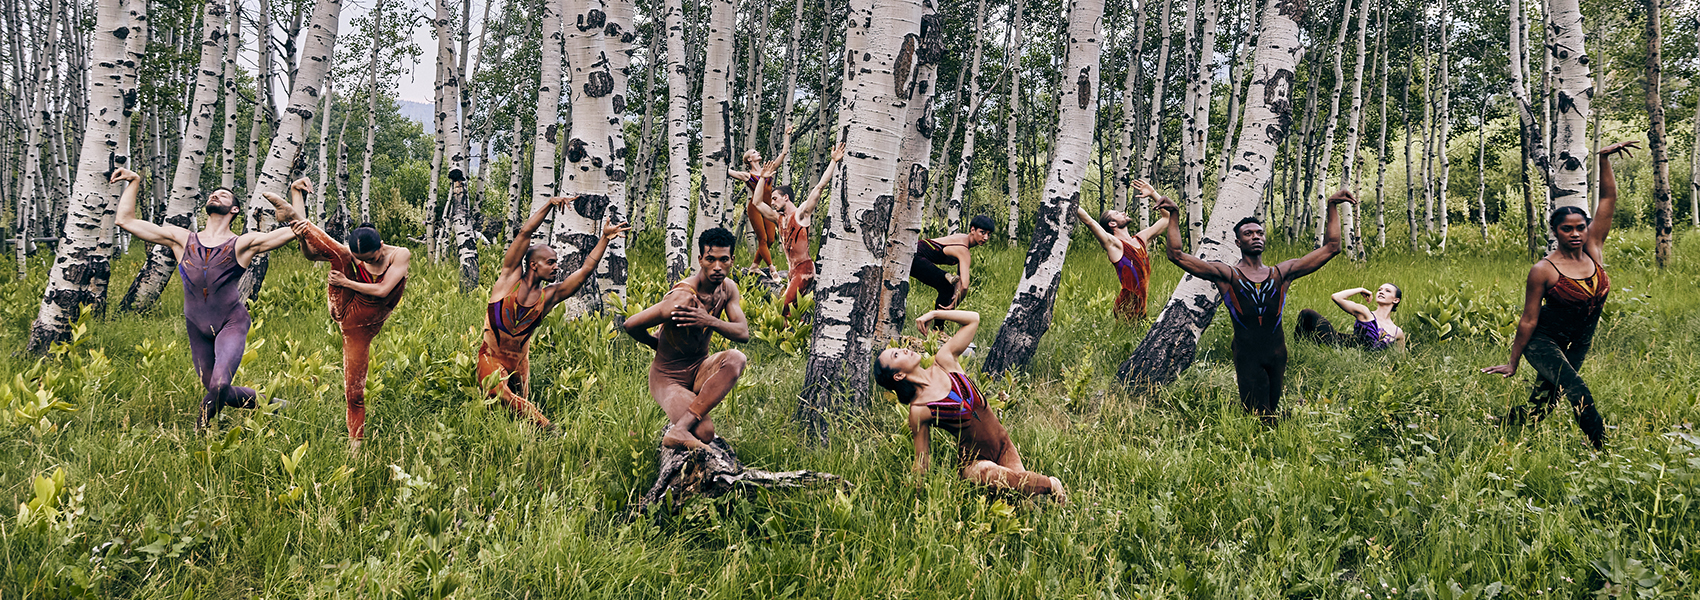 Dancers from the Limon Dance company are picture striking poses in a forest of birch trees.